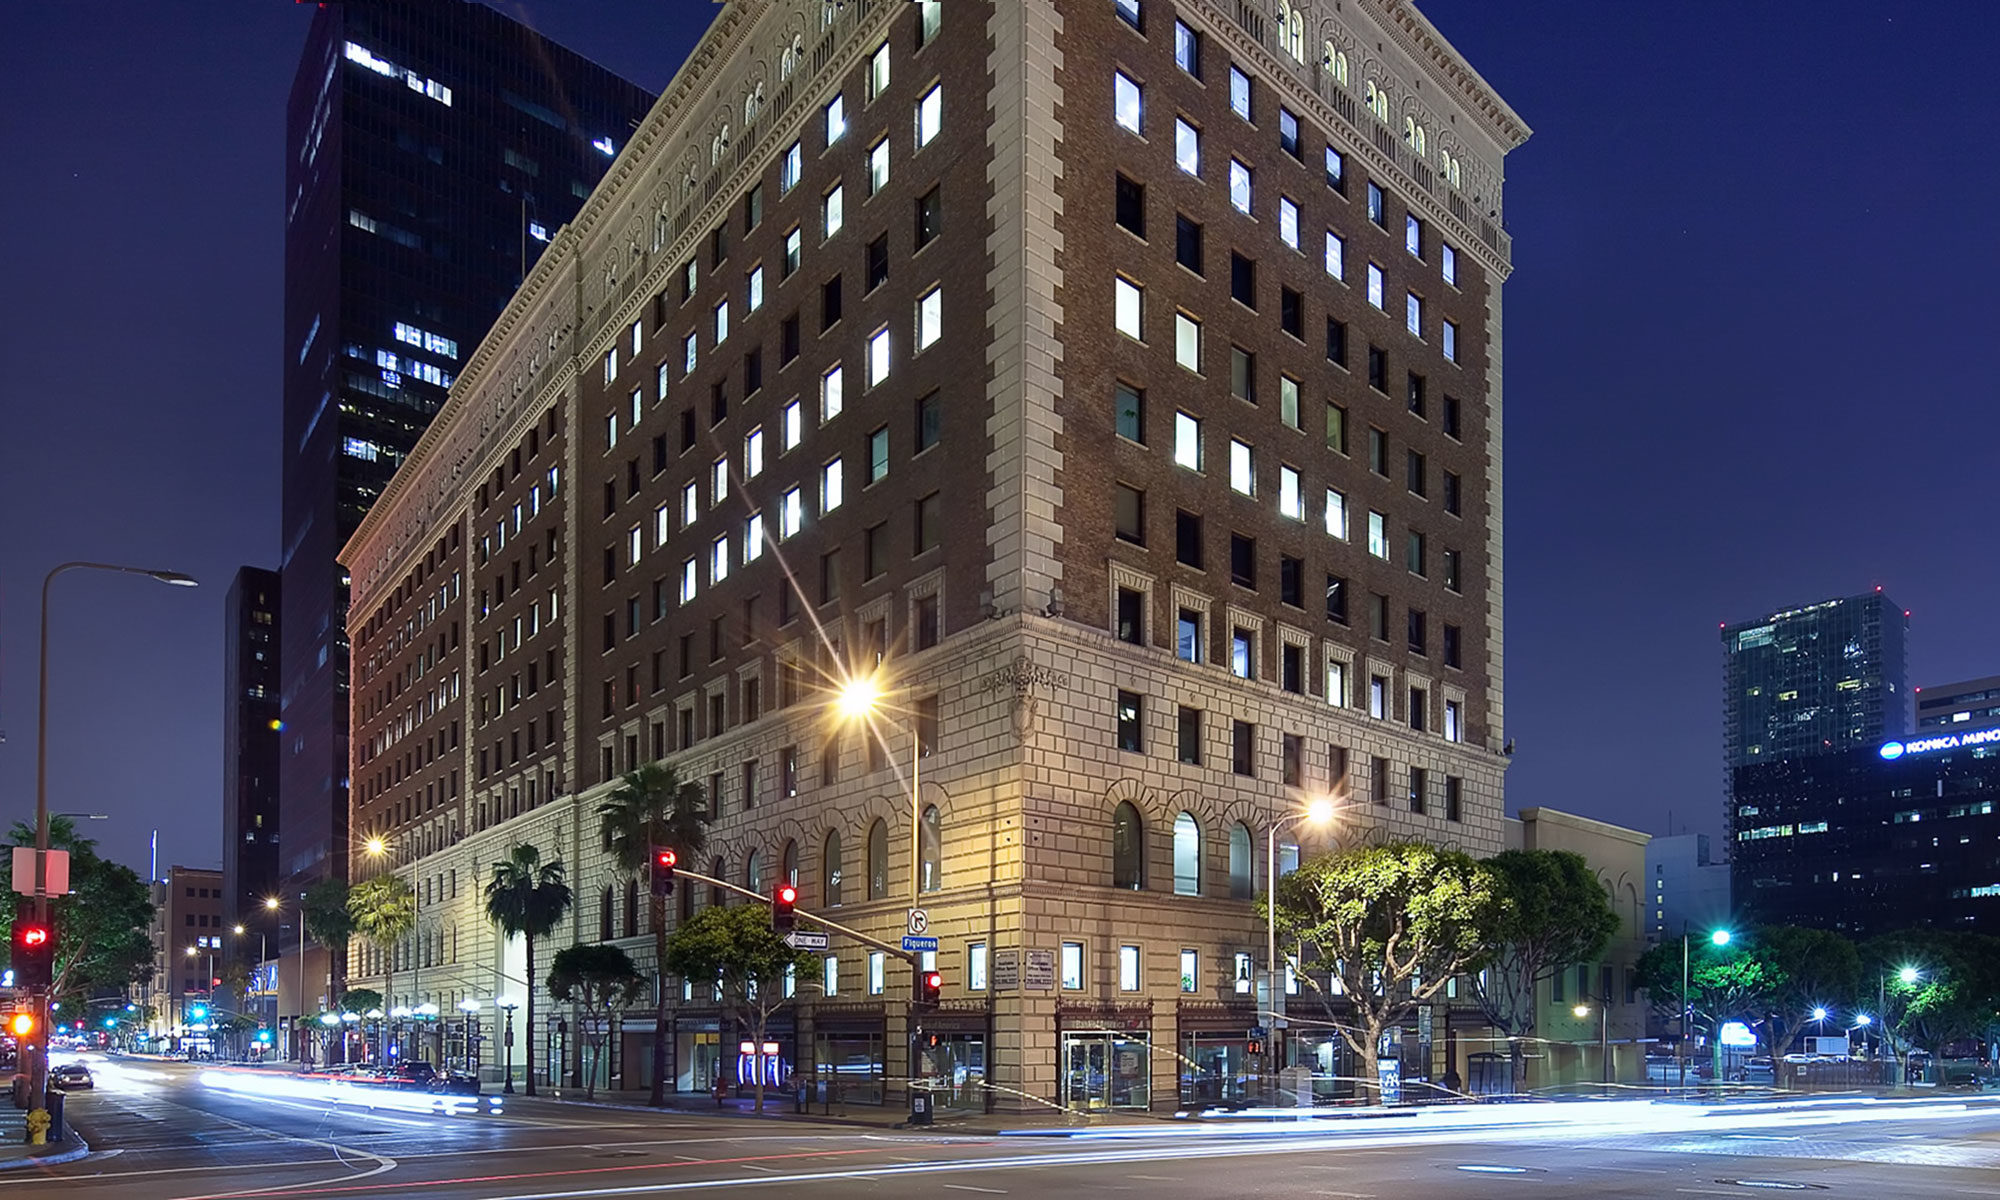 Photo of exterior of 818 Plaza building at night